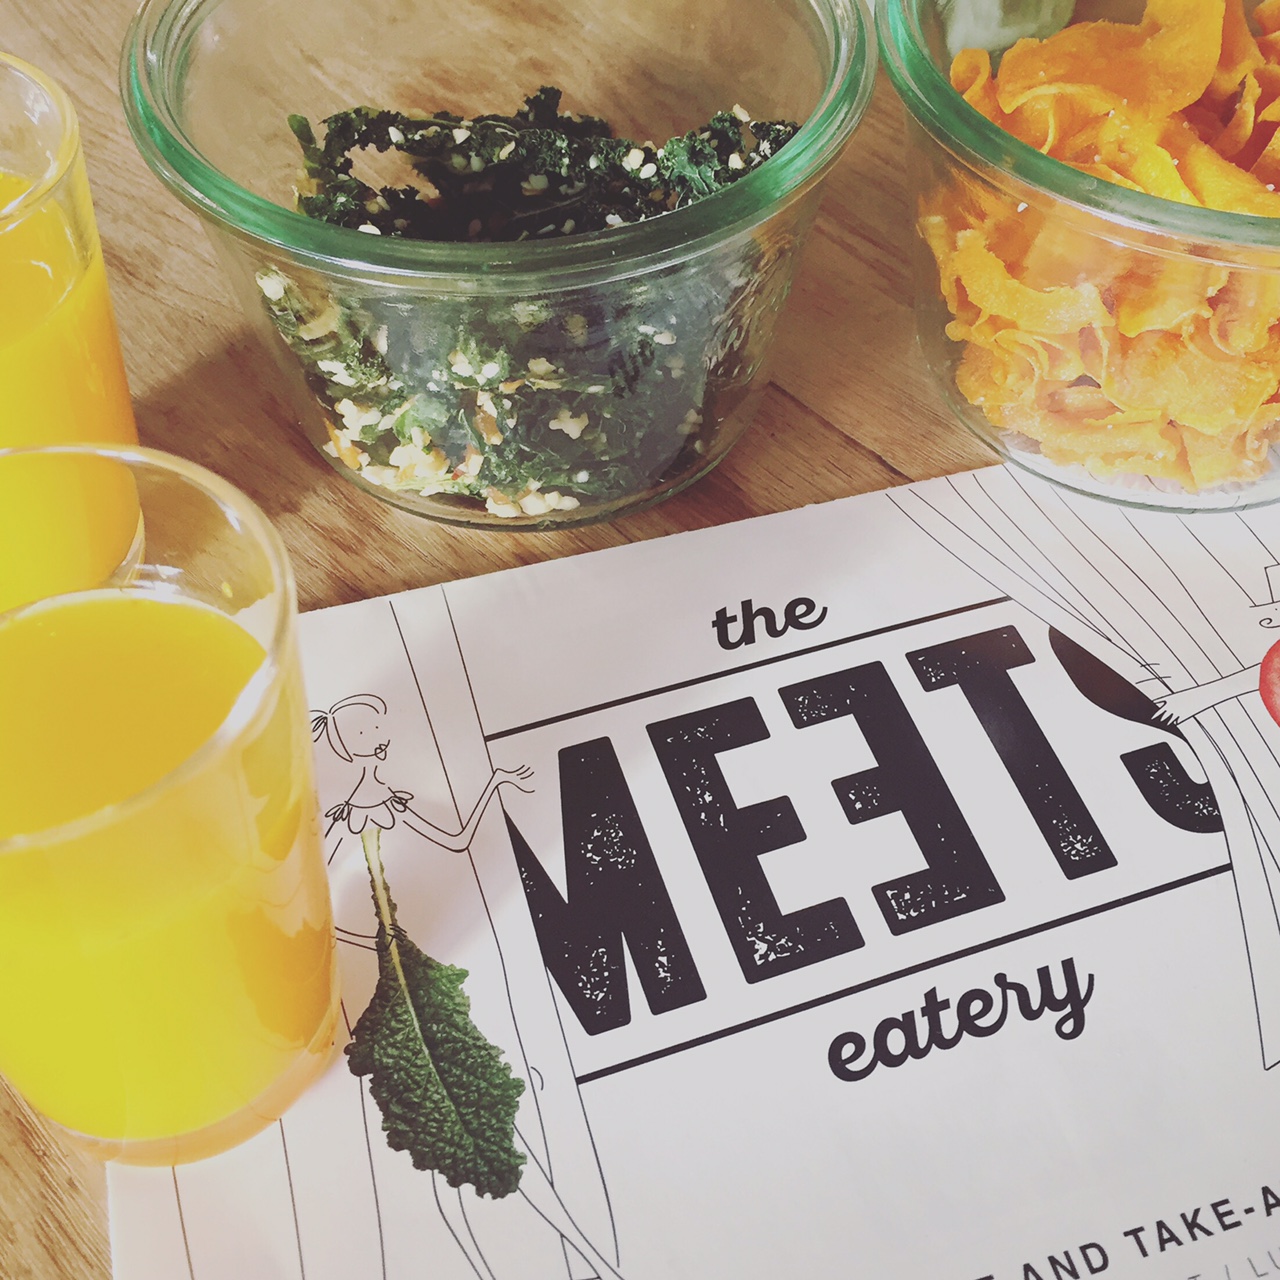 the meets eatery amsterdam